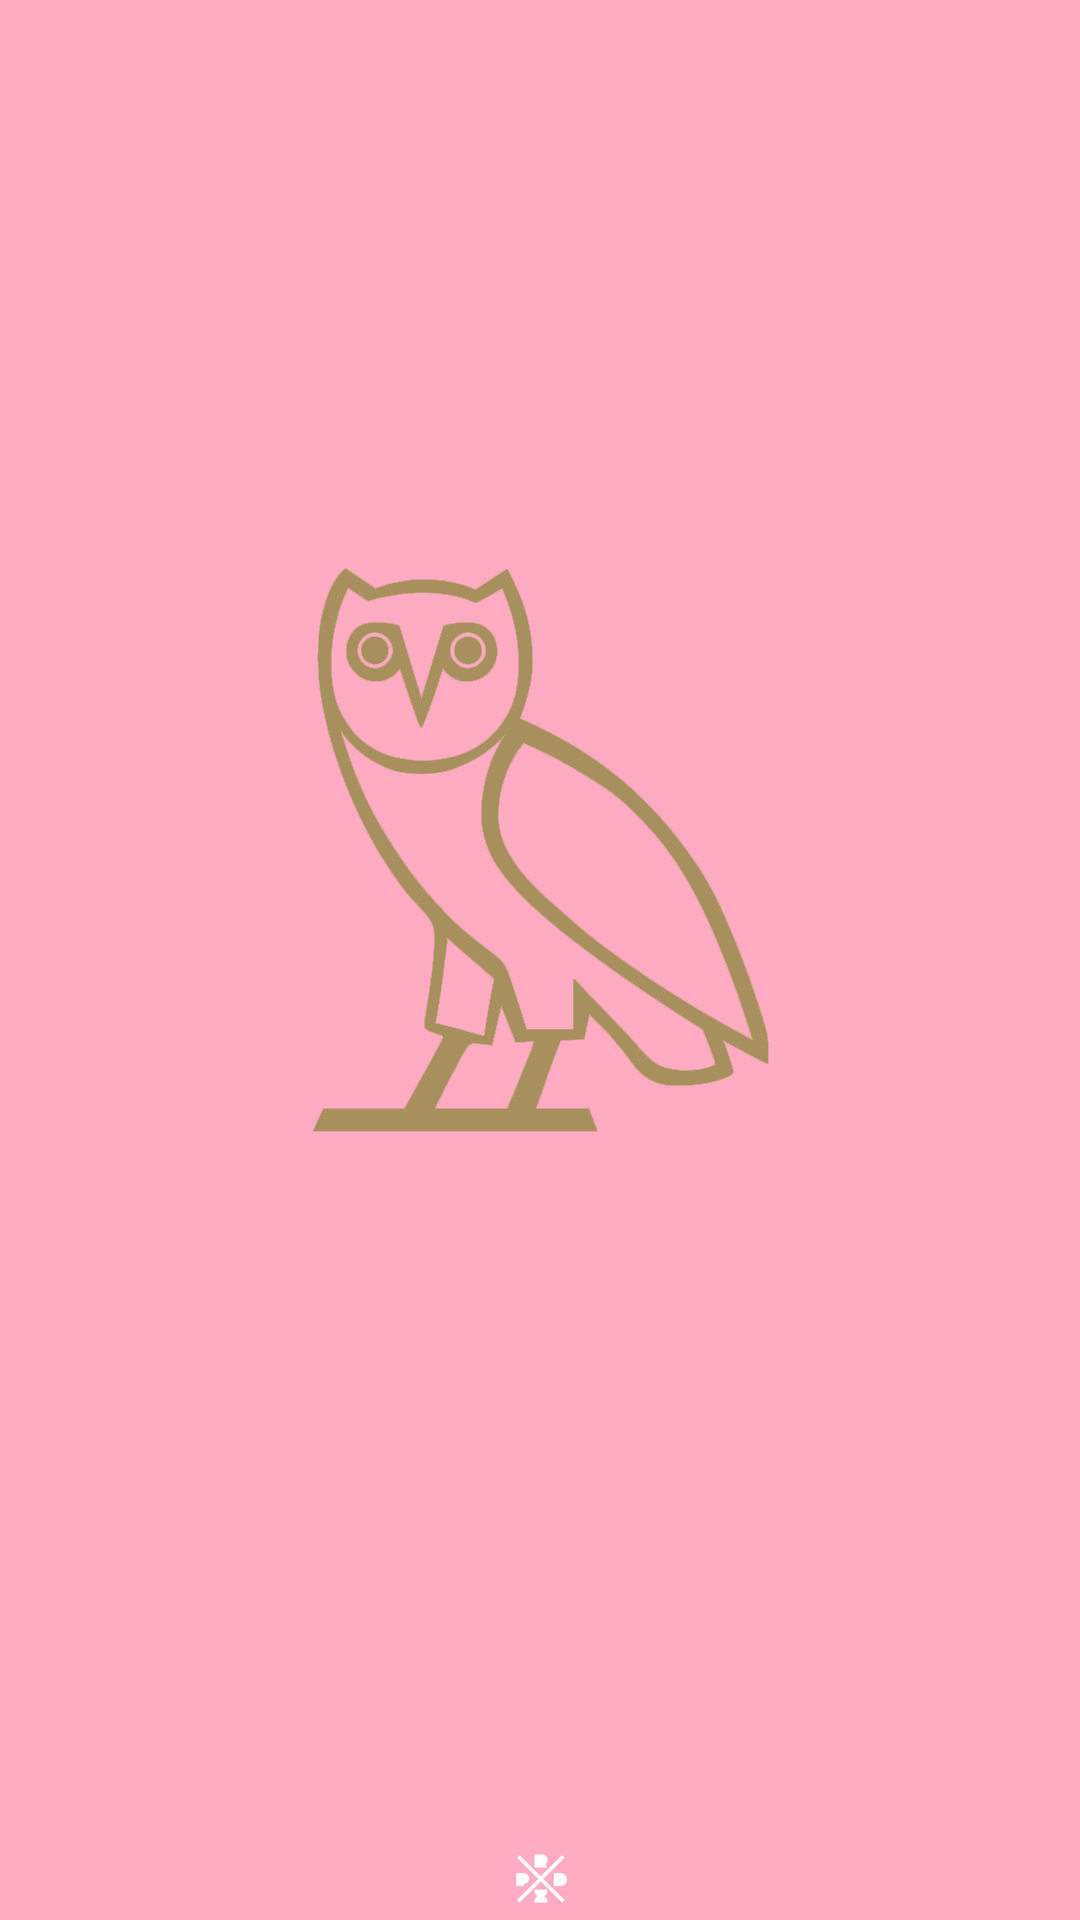 Ovo Logo Wallpapers - Wallpaper Cave